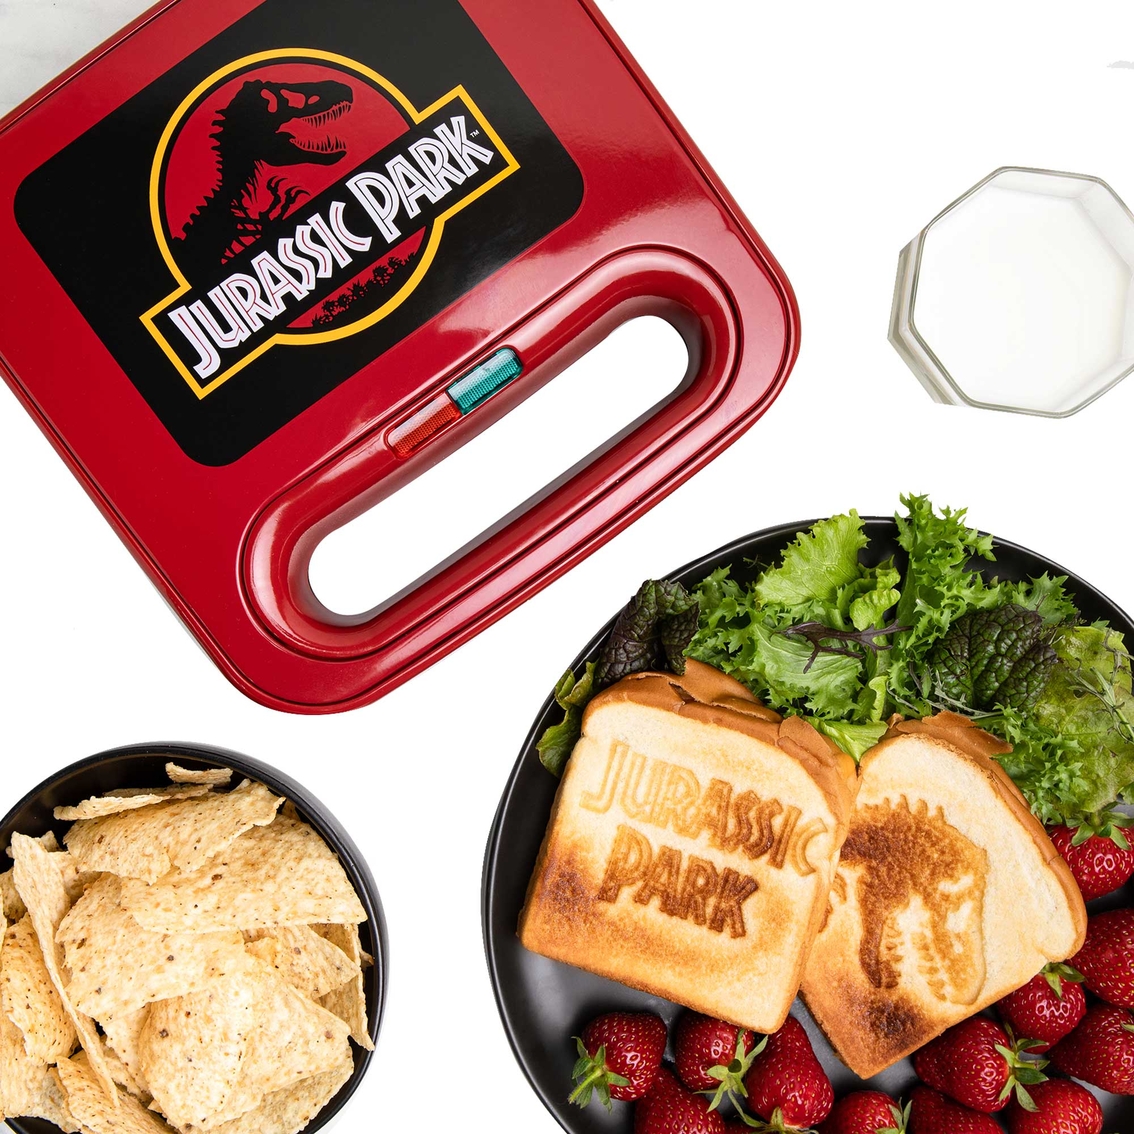 Jurassic Park Grilled Cheese Maker - Image 6 of 6